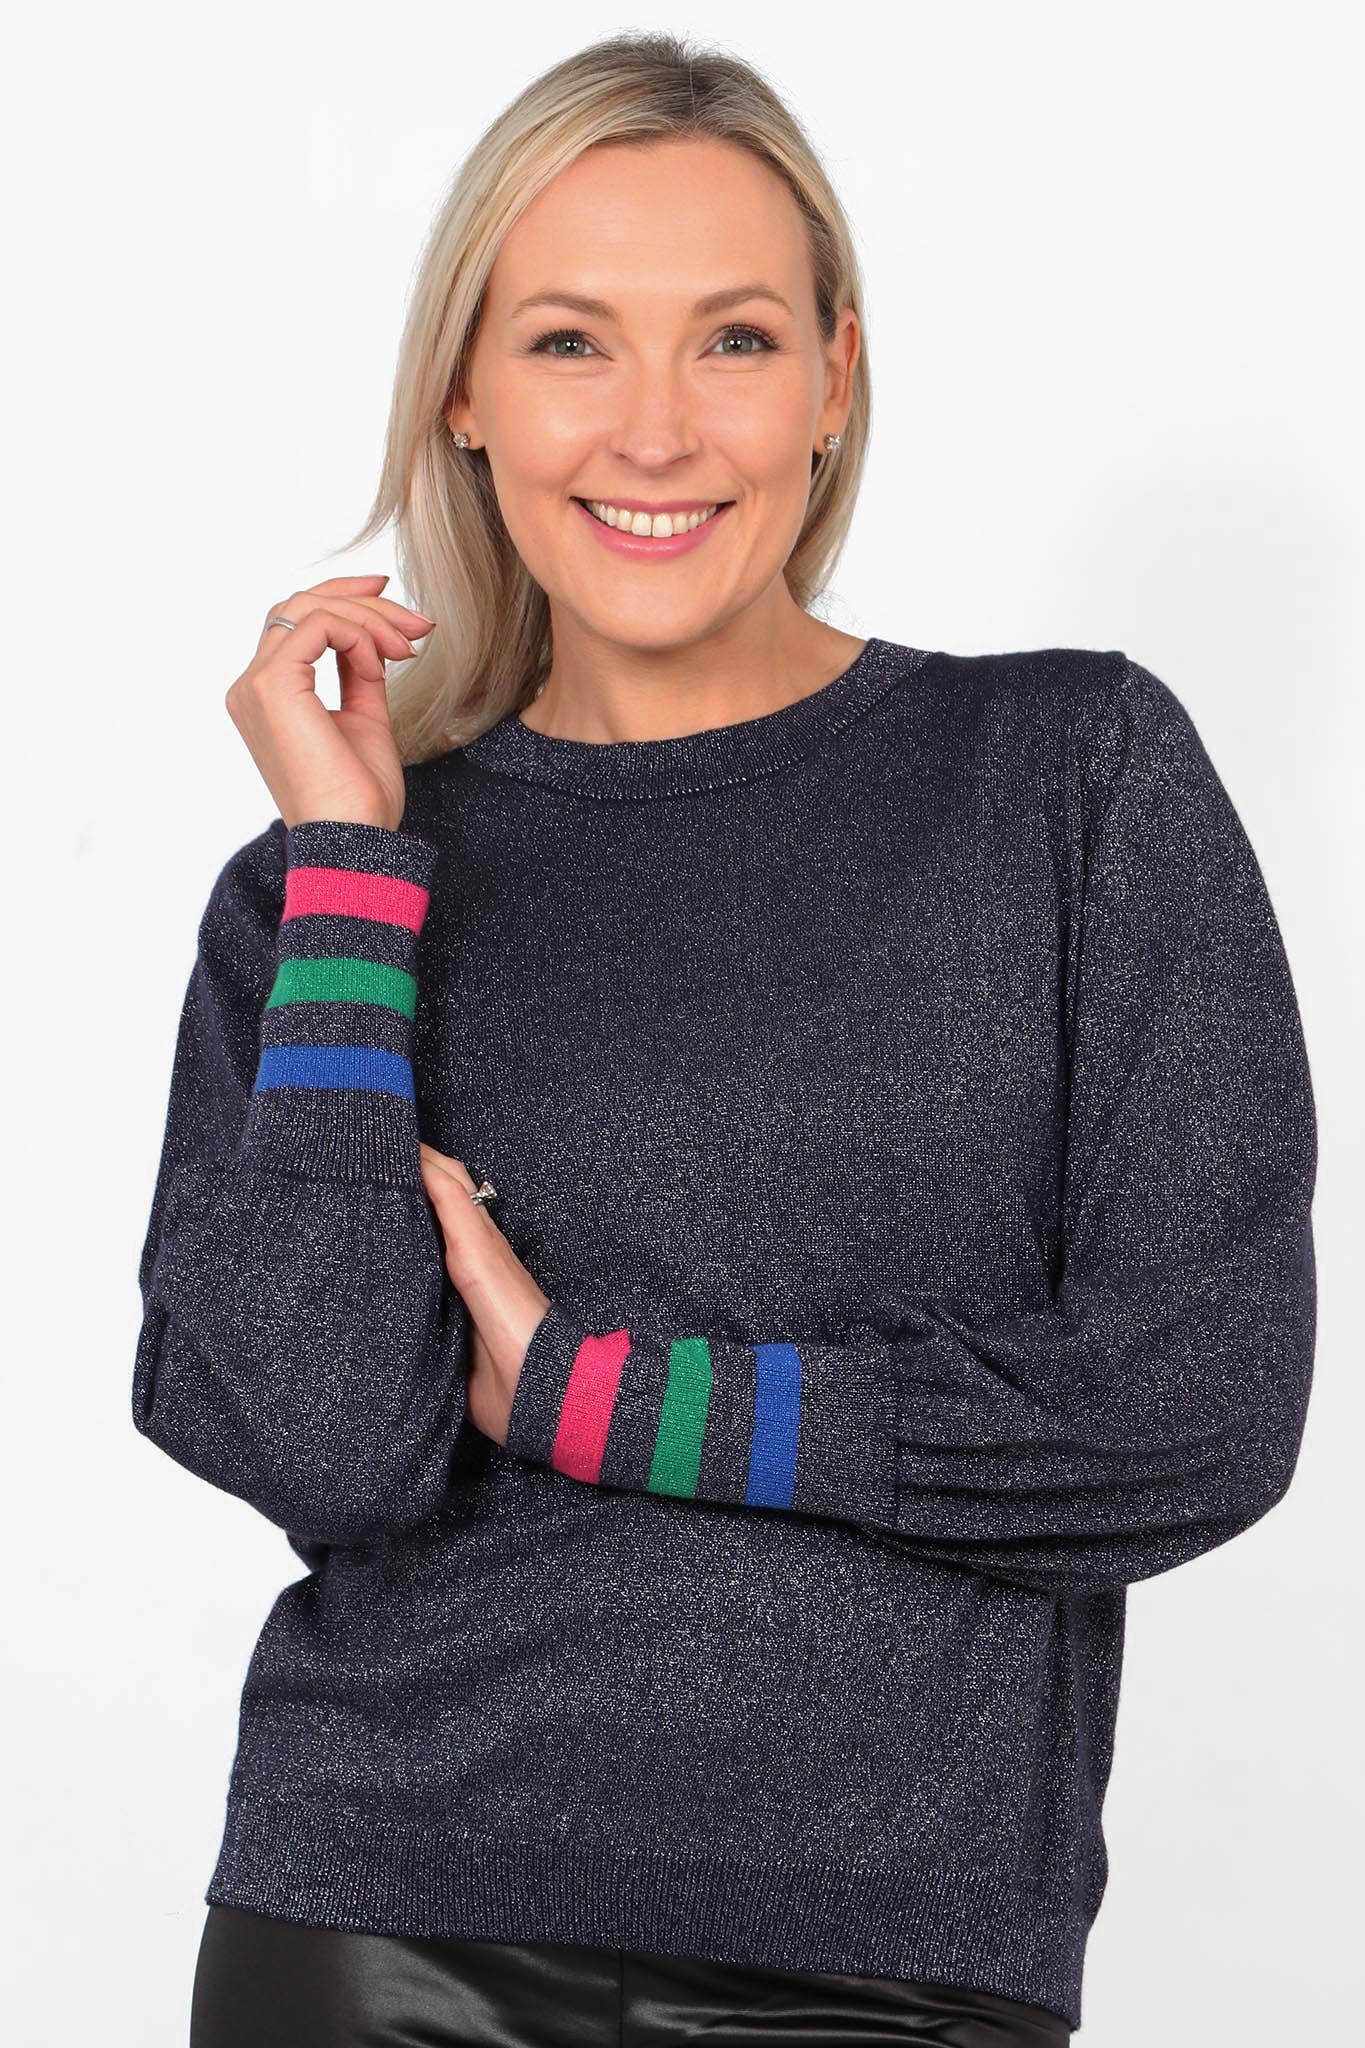 Navy Blue Multi Balloon Sleeve Jumper with Striped Cuff: Large (16-18)